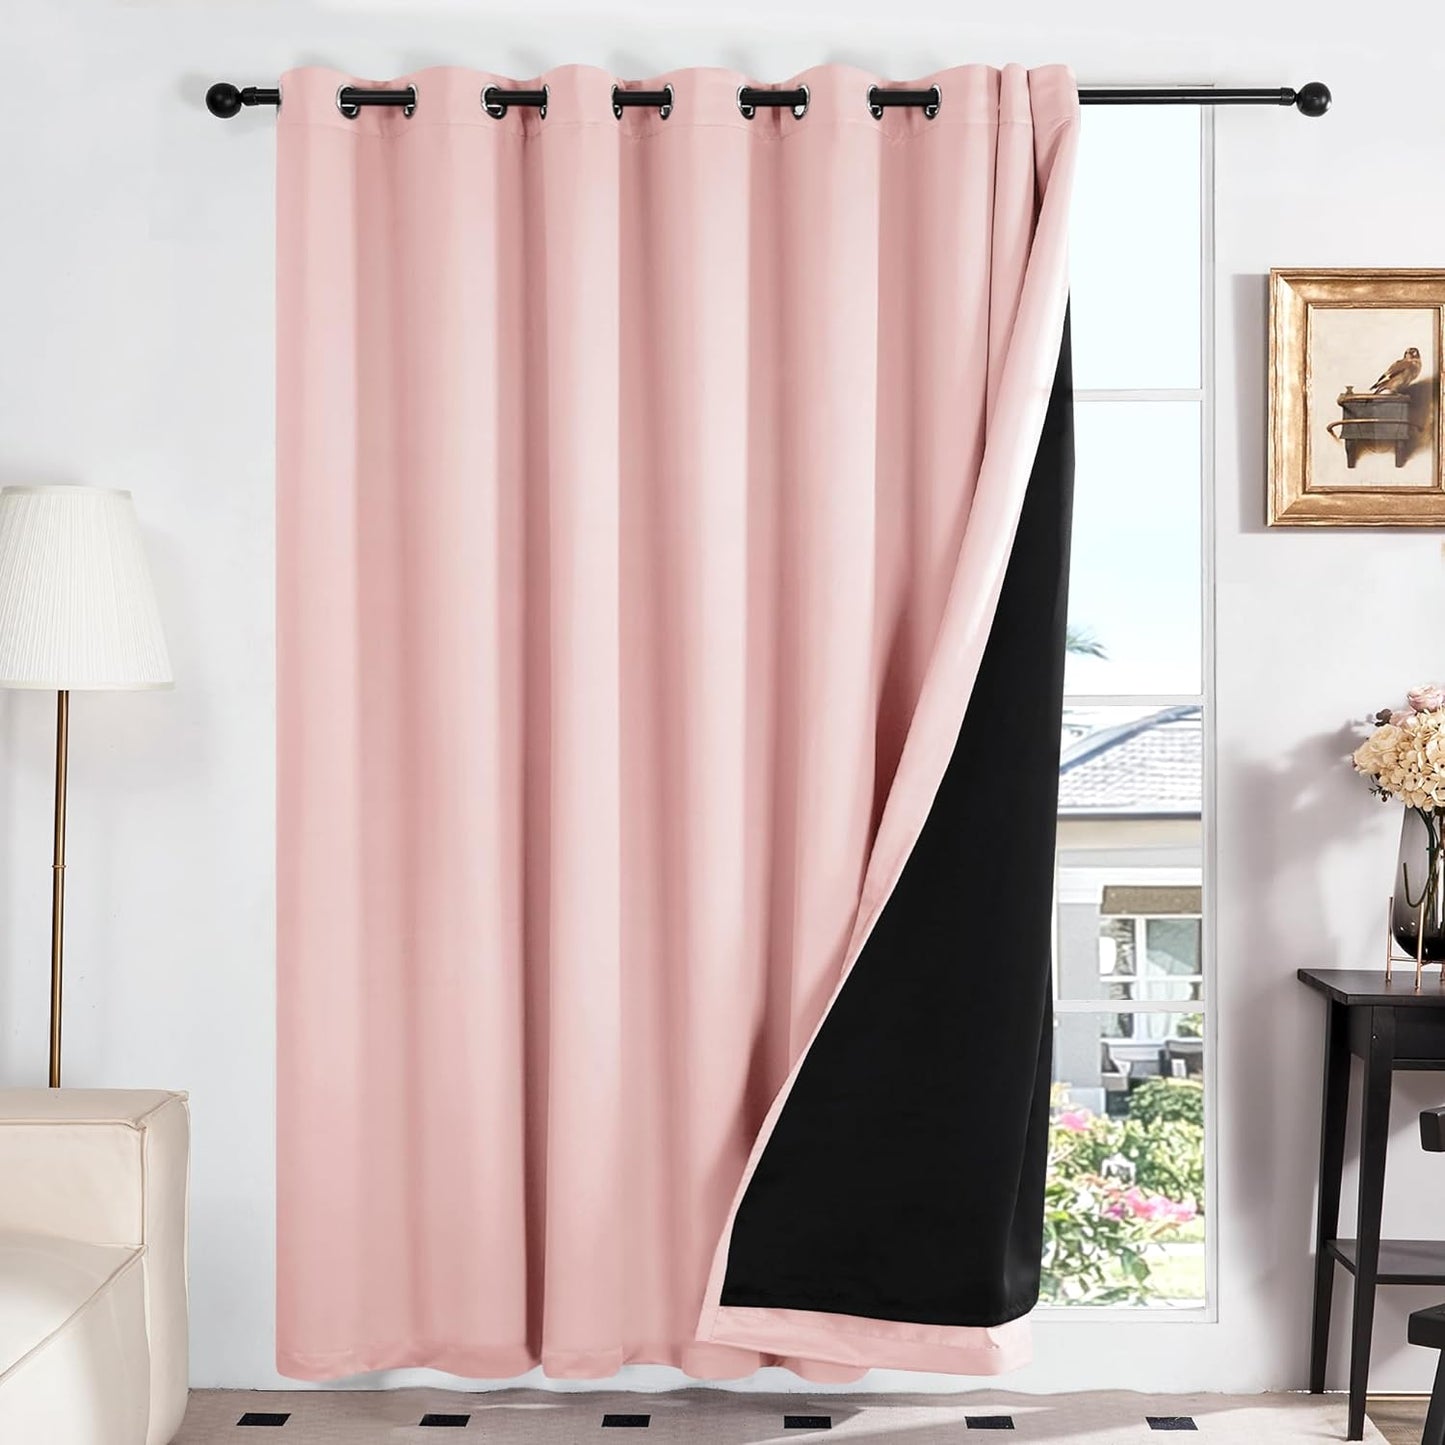 Deconovo 100% White Blackout Curtains, Double Layer Sliding Door Curtain for Living Room, Extra Wide Room Divder Curtains for Patio Door (100W X 84L Inches, Pure White, 1 Panel)  DECONOVO Pink 100W X 95L Inch 